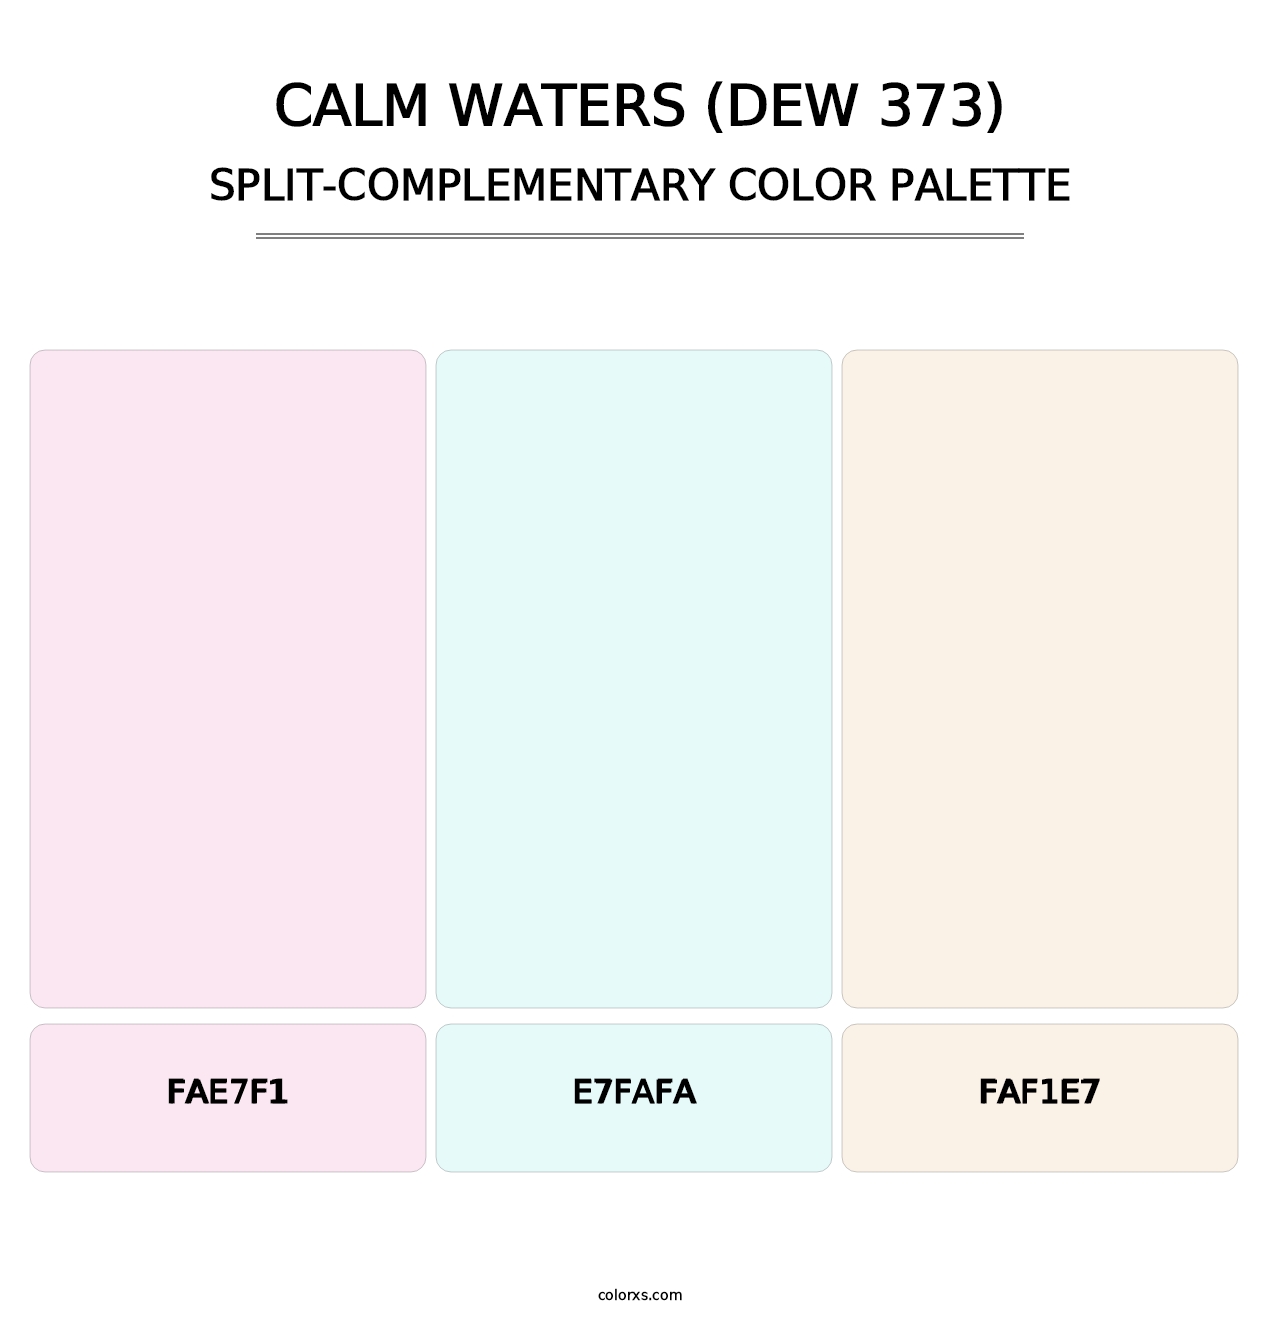 Calm Waters (DEW 373) - Split-Complementary Color Palette